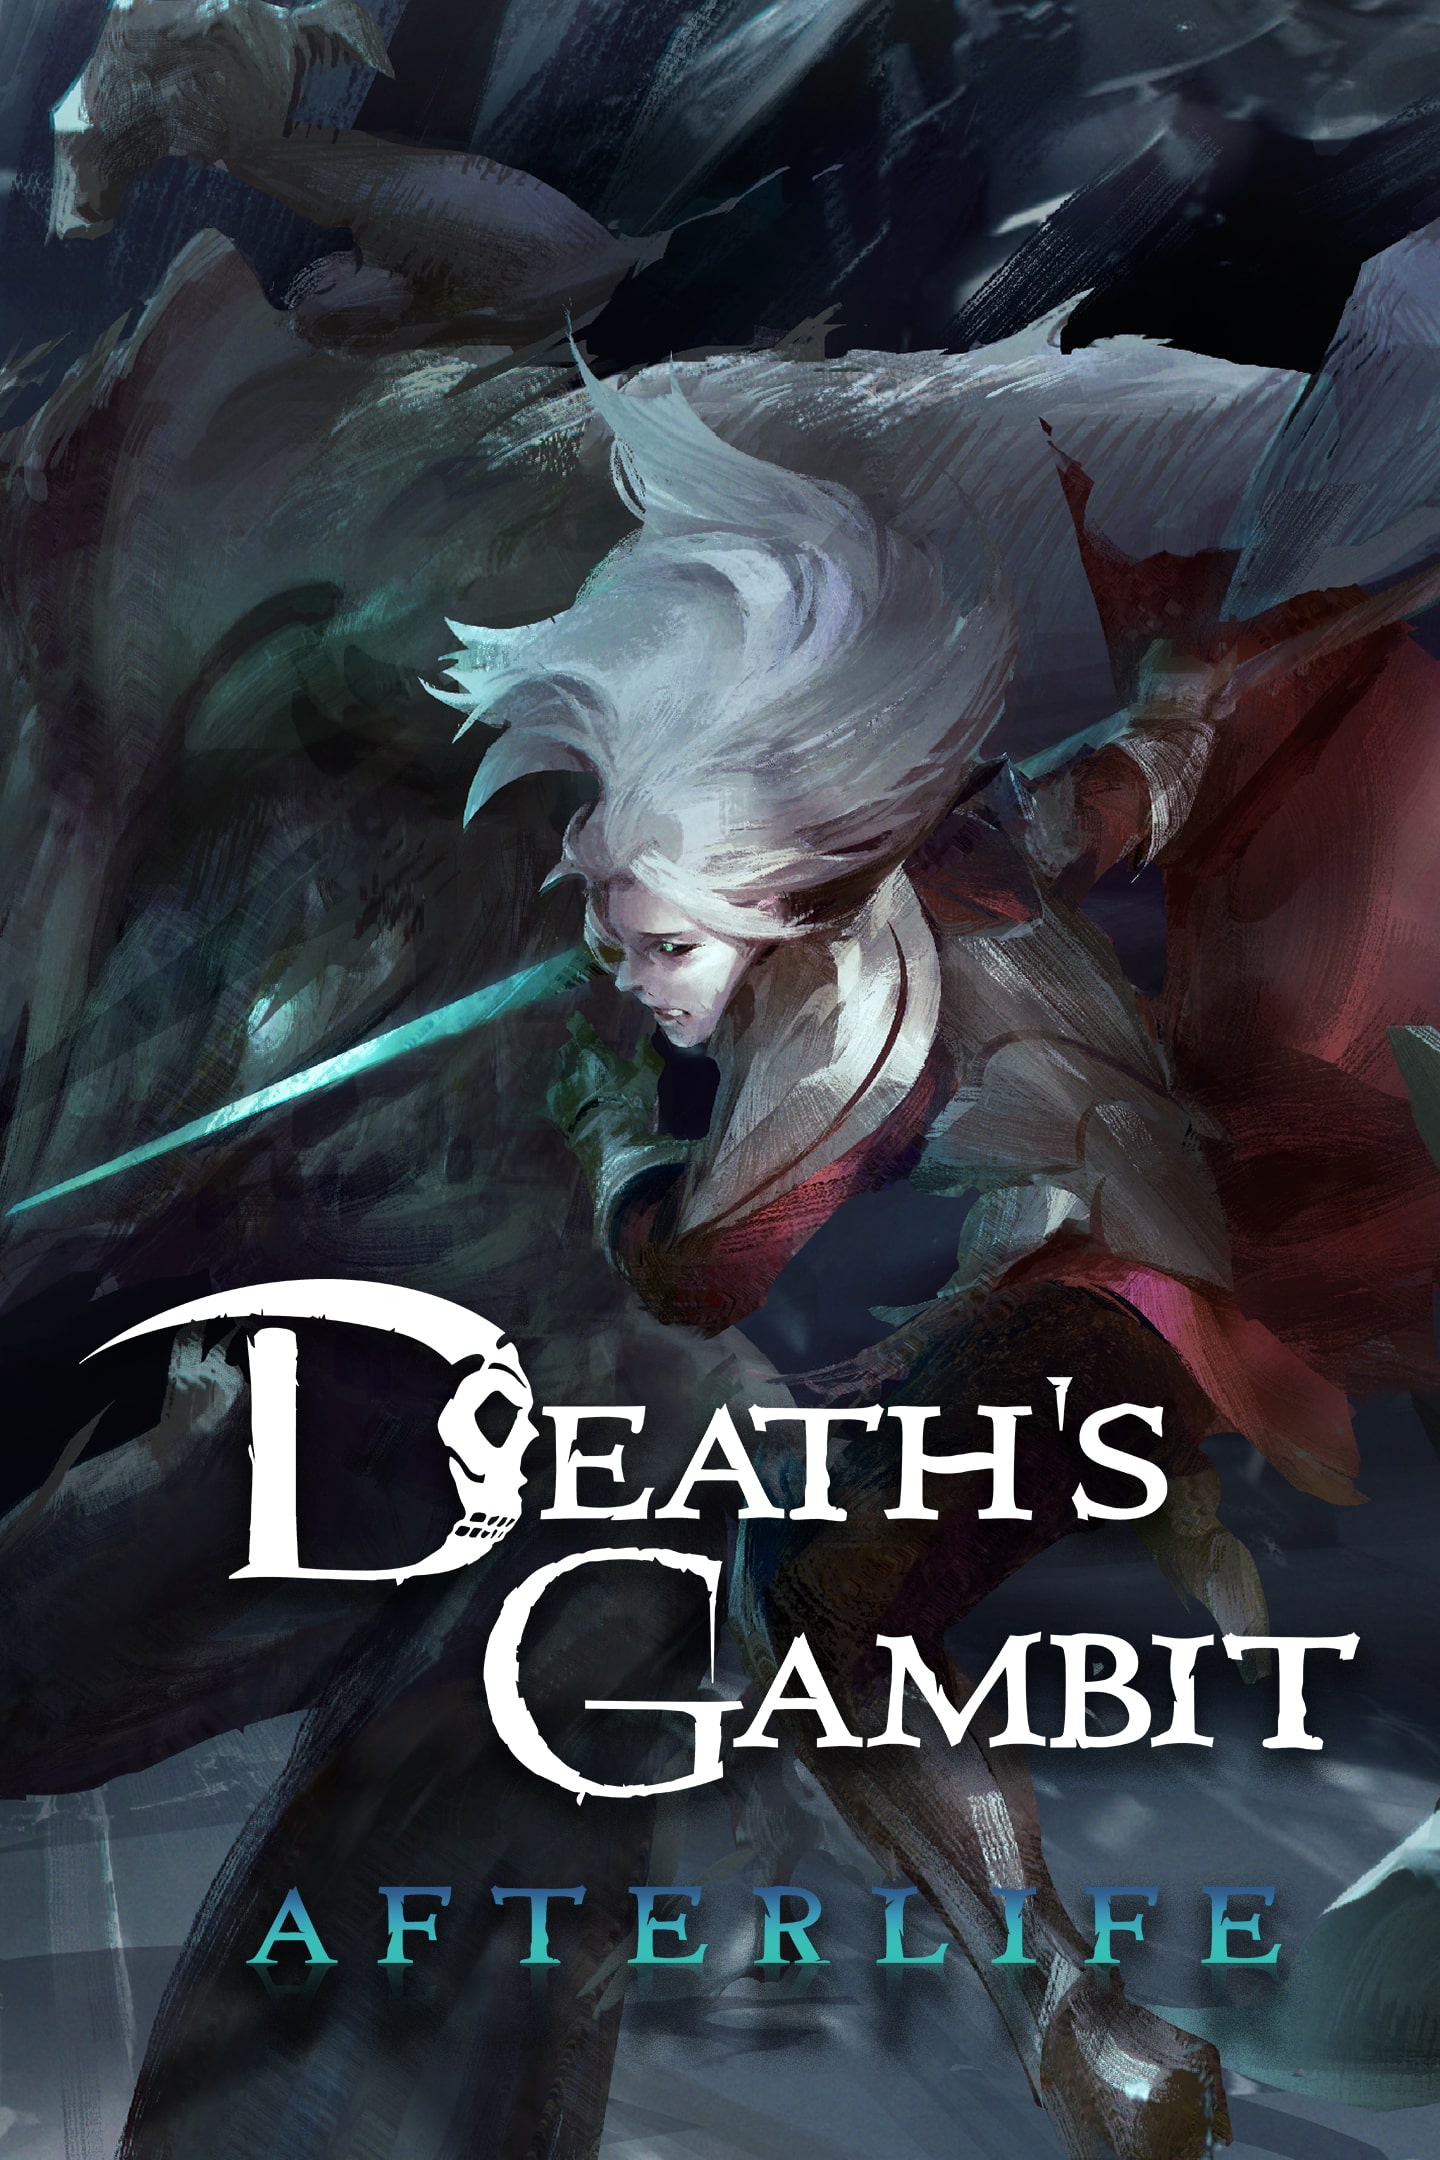 Death's Gambit: Afterlife now available - Death's Gambit is out on PC/PS4  today! Go vanquish some immortals!